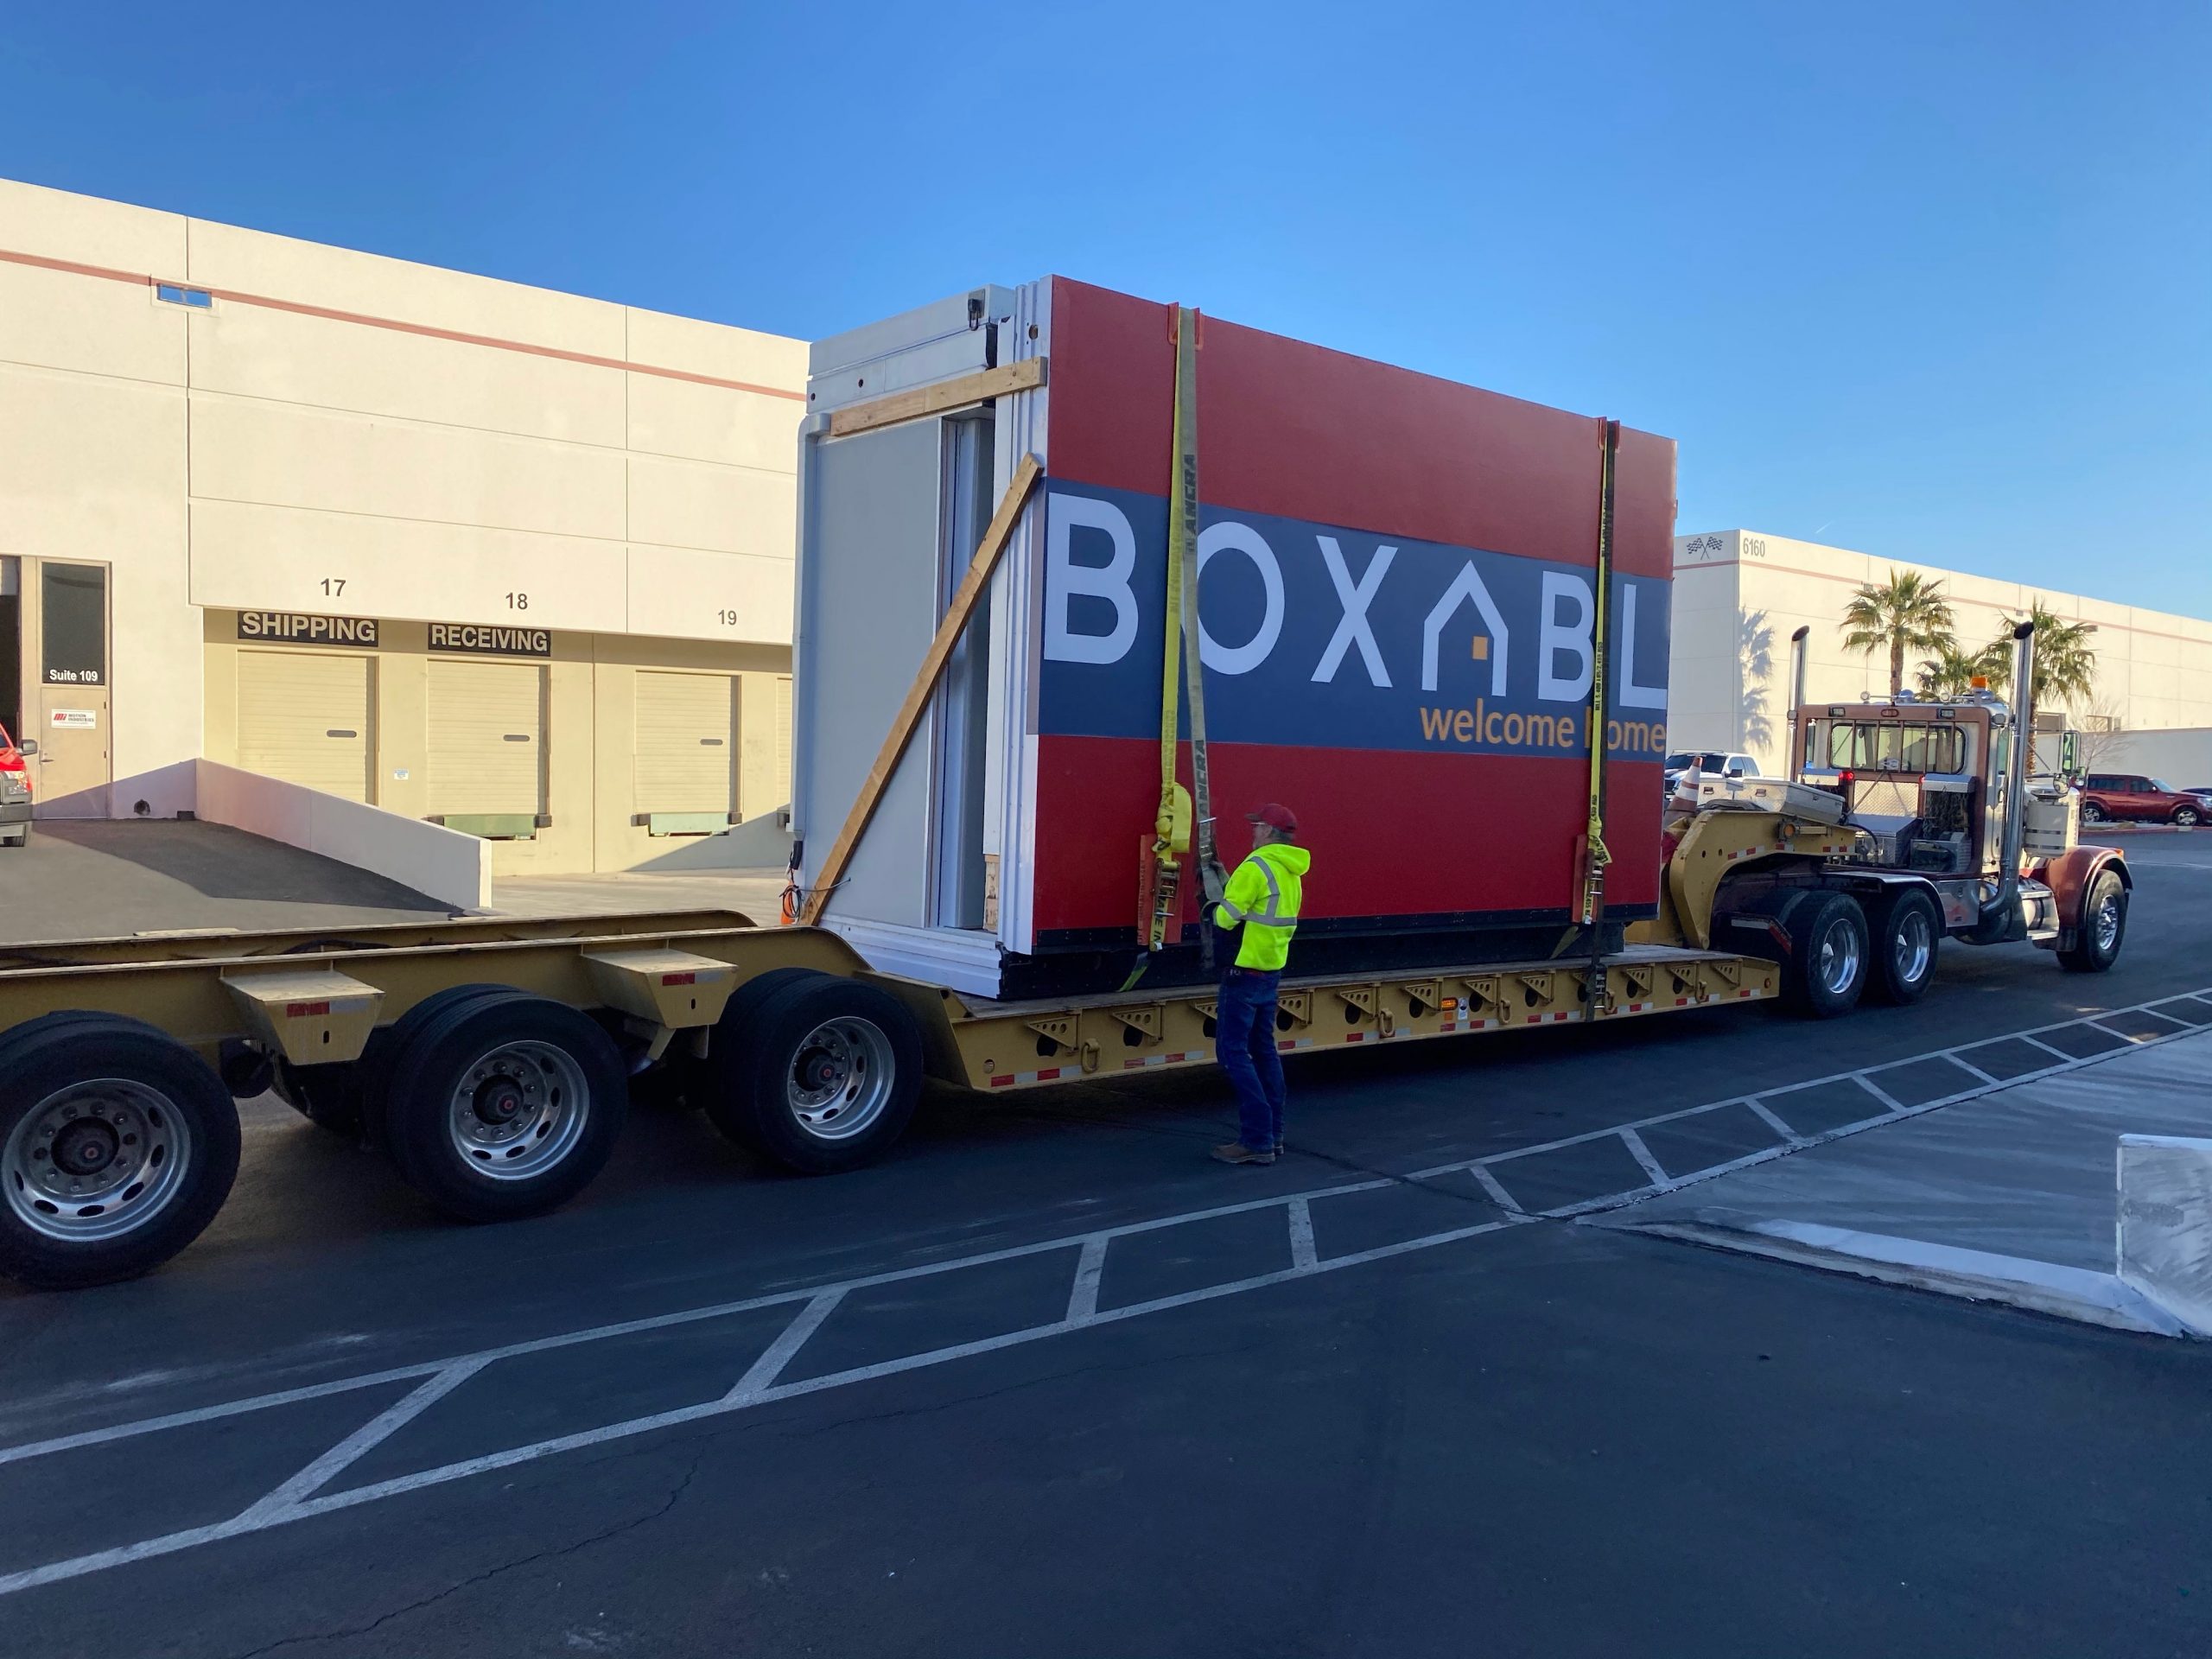 the Boxabl logo on a unit being moved